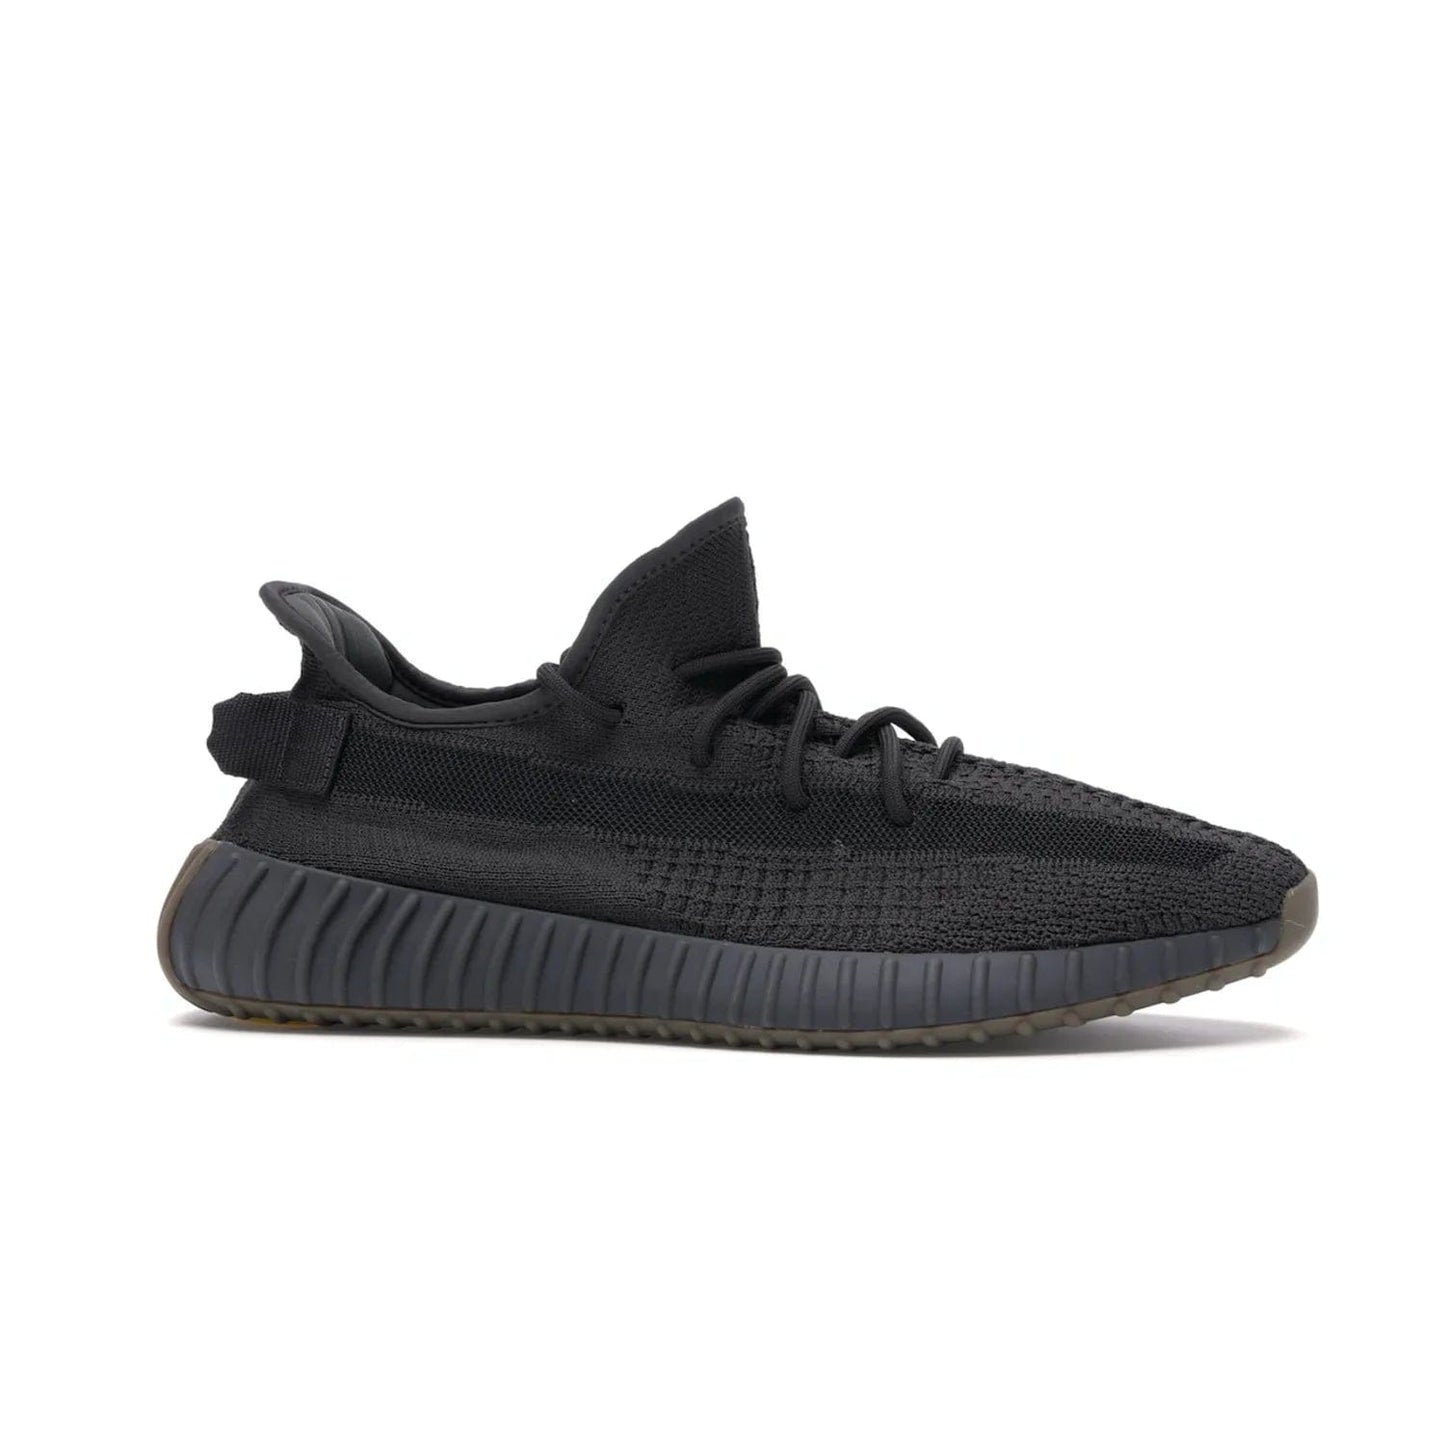 adidas Yeezy Boost 350 V2 Cinder - Image 2 - Only at www.BallersClubKickz.com - Shop for the stylish and eye catching adidas Yeezy 350 V2 Cinder in earth tones. Boost cushioned midsole and gold outsole add a touch of boldness. A timeless addition to any wardrobe.